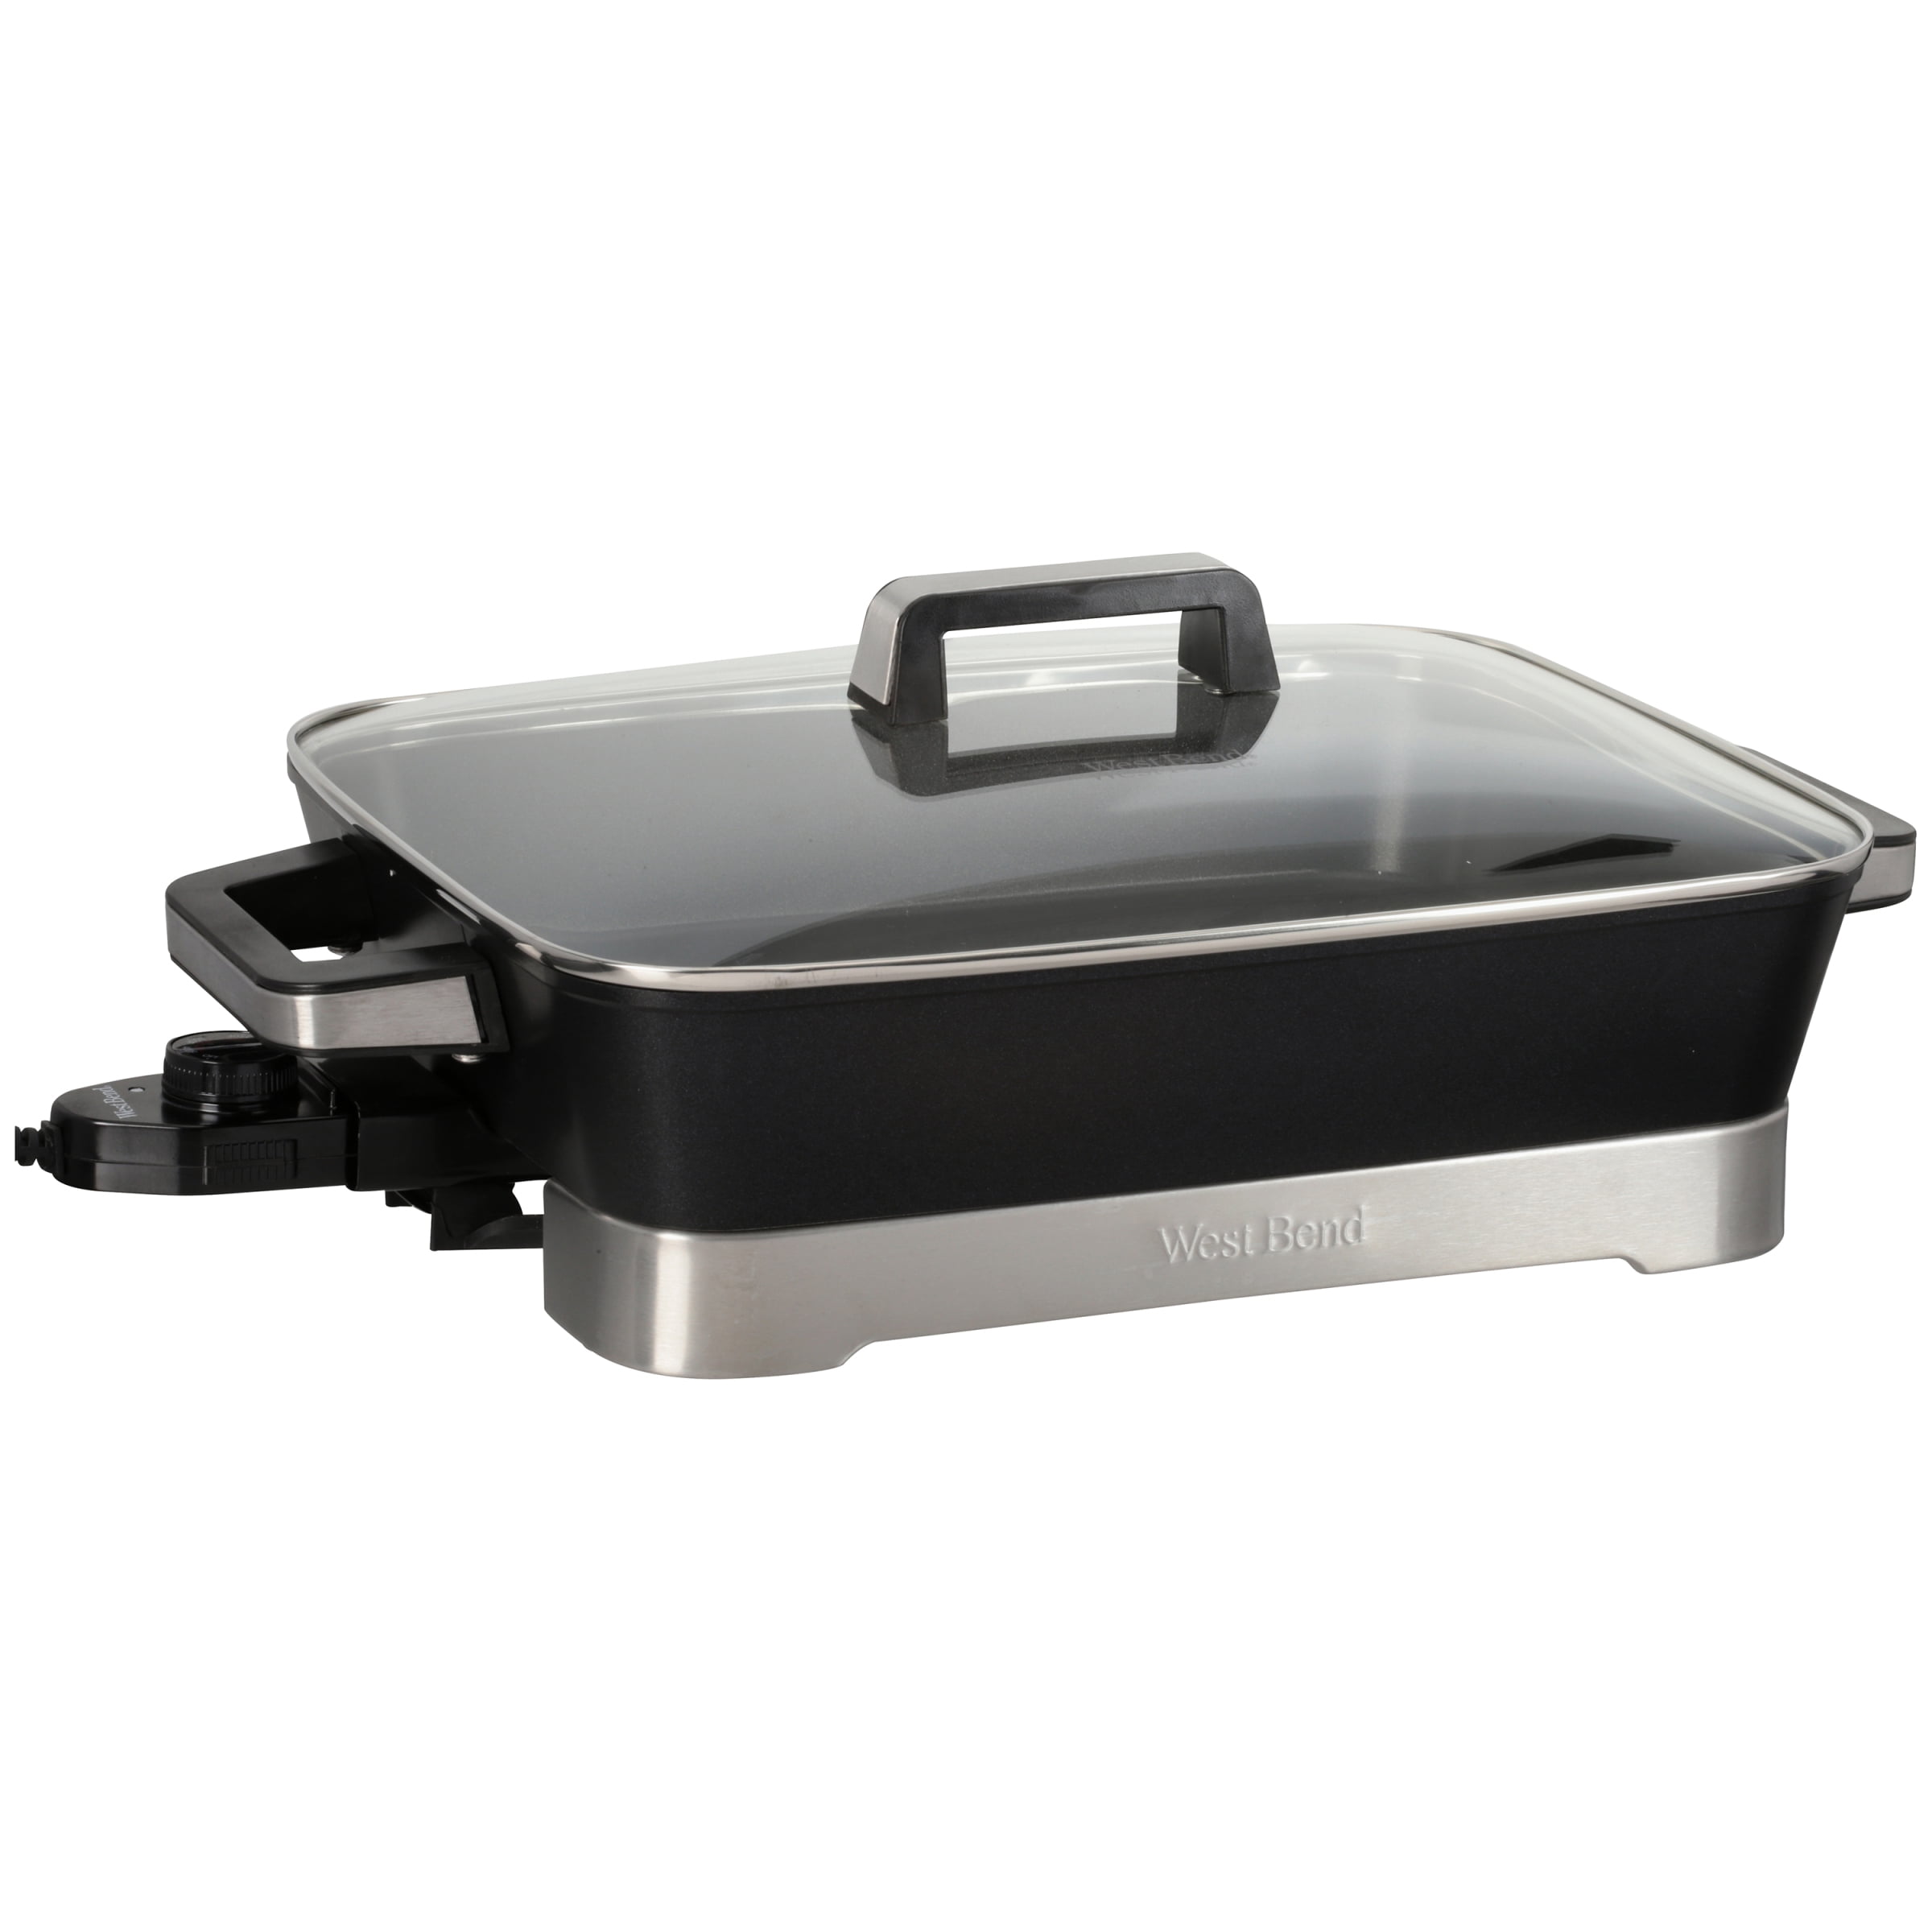 12 inch by 15 inch Electric Skillet